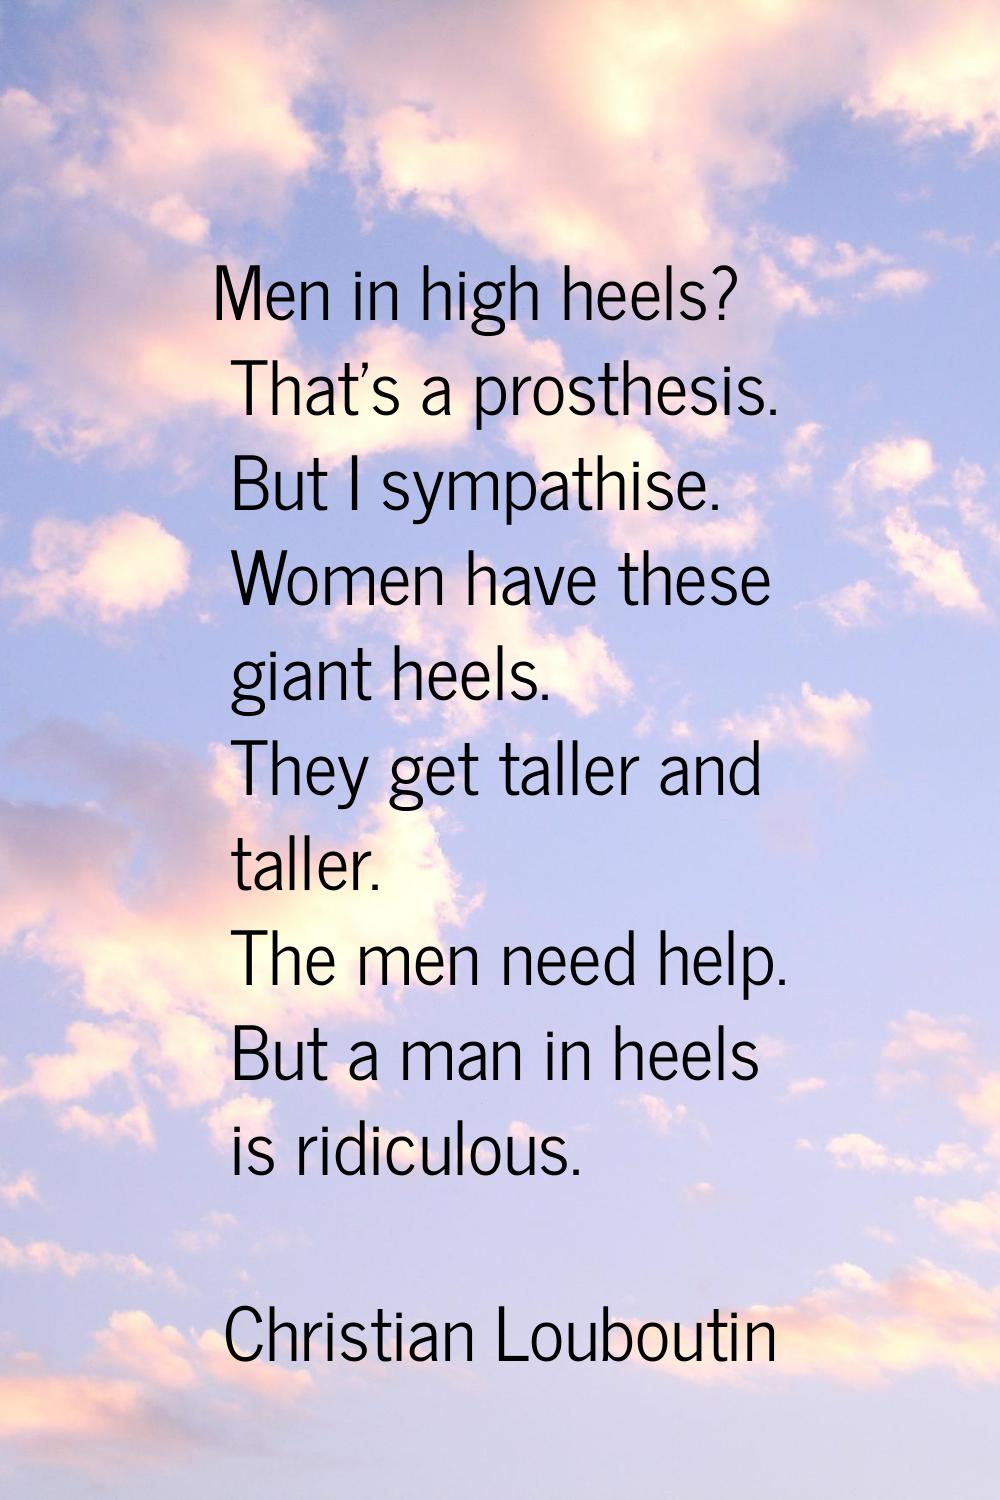 Men in high heels? That's a prosthesis. But I sympathise. Women have these giant heels. They get ta